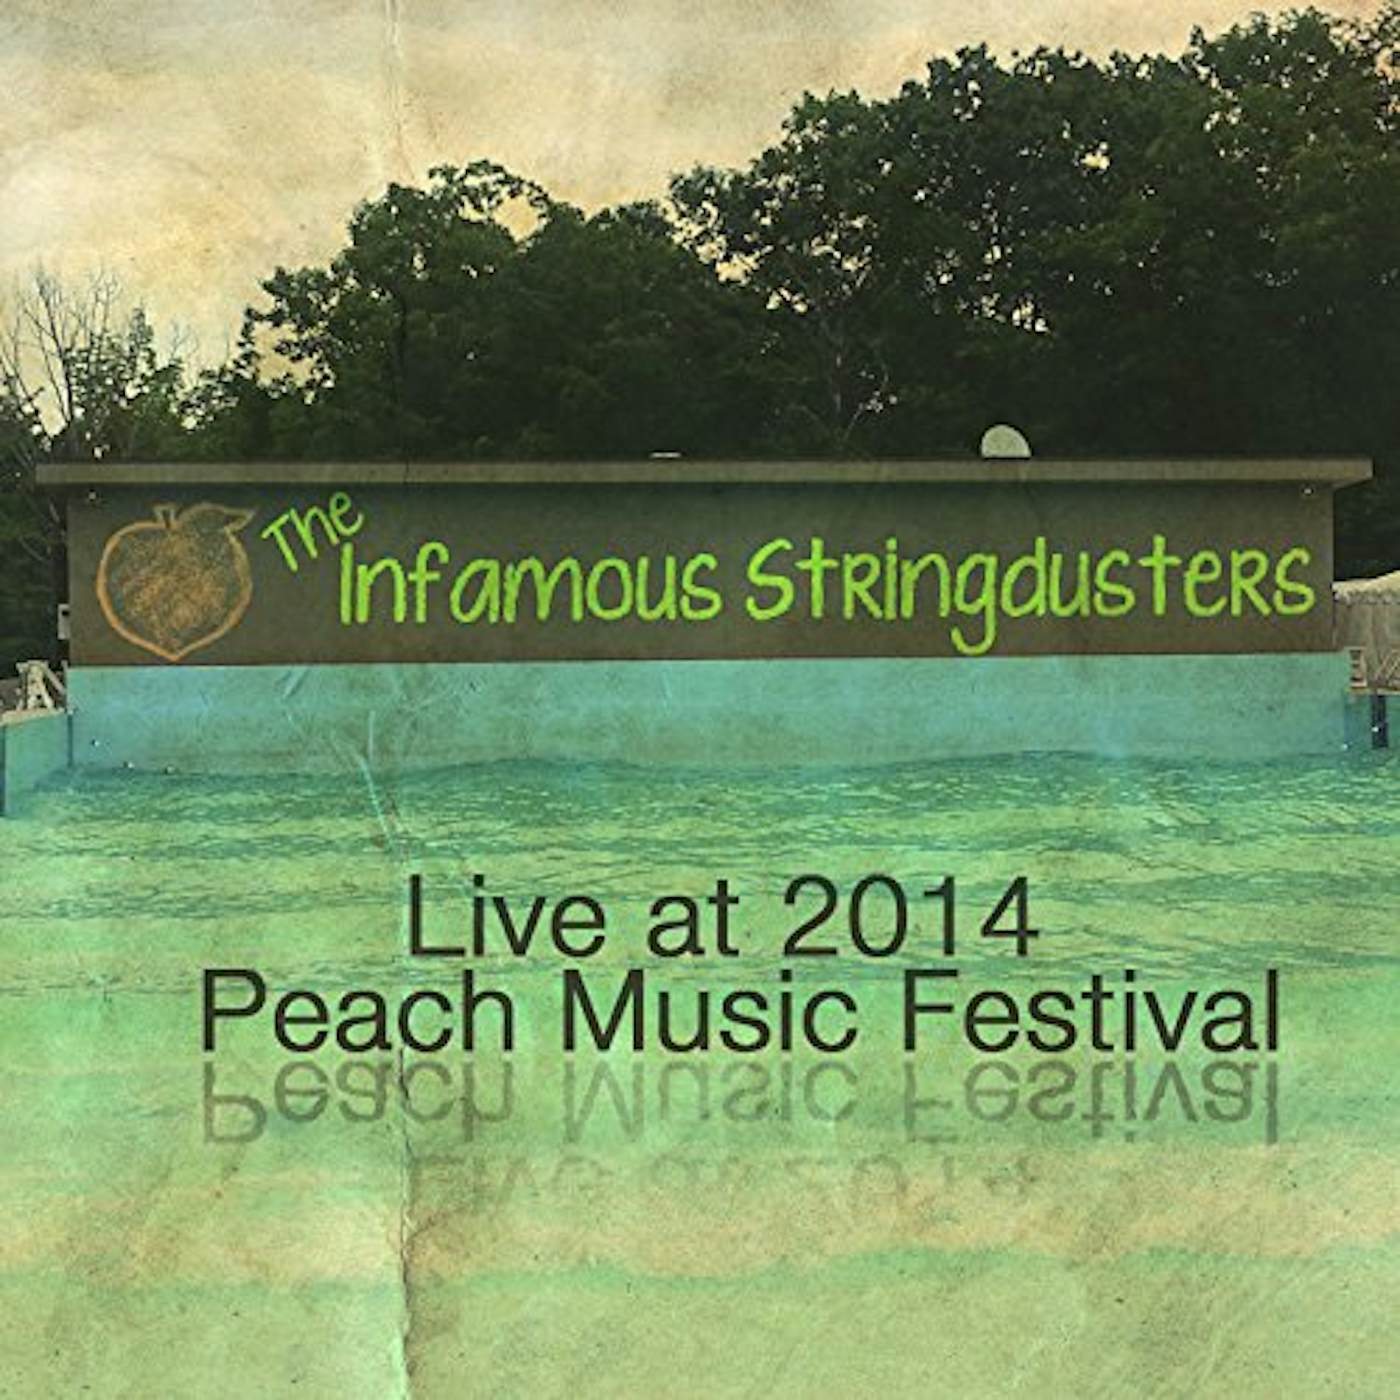 The Infamous Stringdusters LIVE AT PEACH MUSIC FESTIVAL 2014 CD